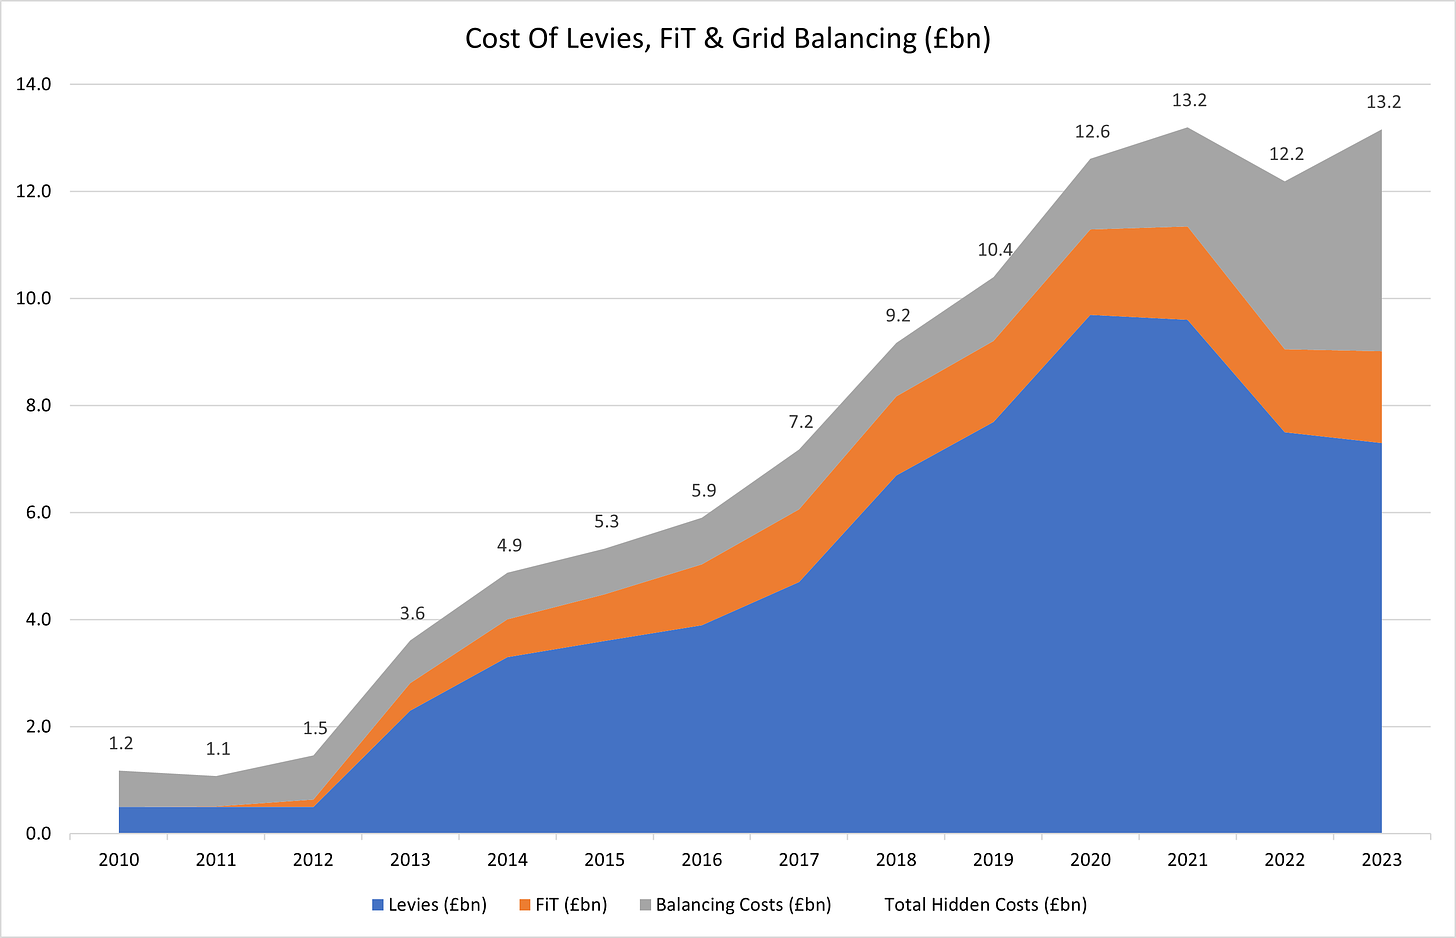 Figure 7 - Cost of Levies, FiT and Grid Balancing 2010-2023 (£bn)